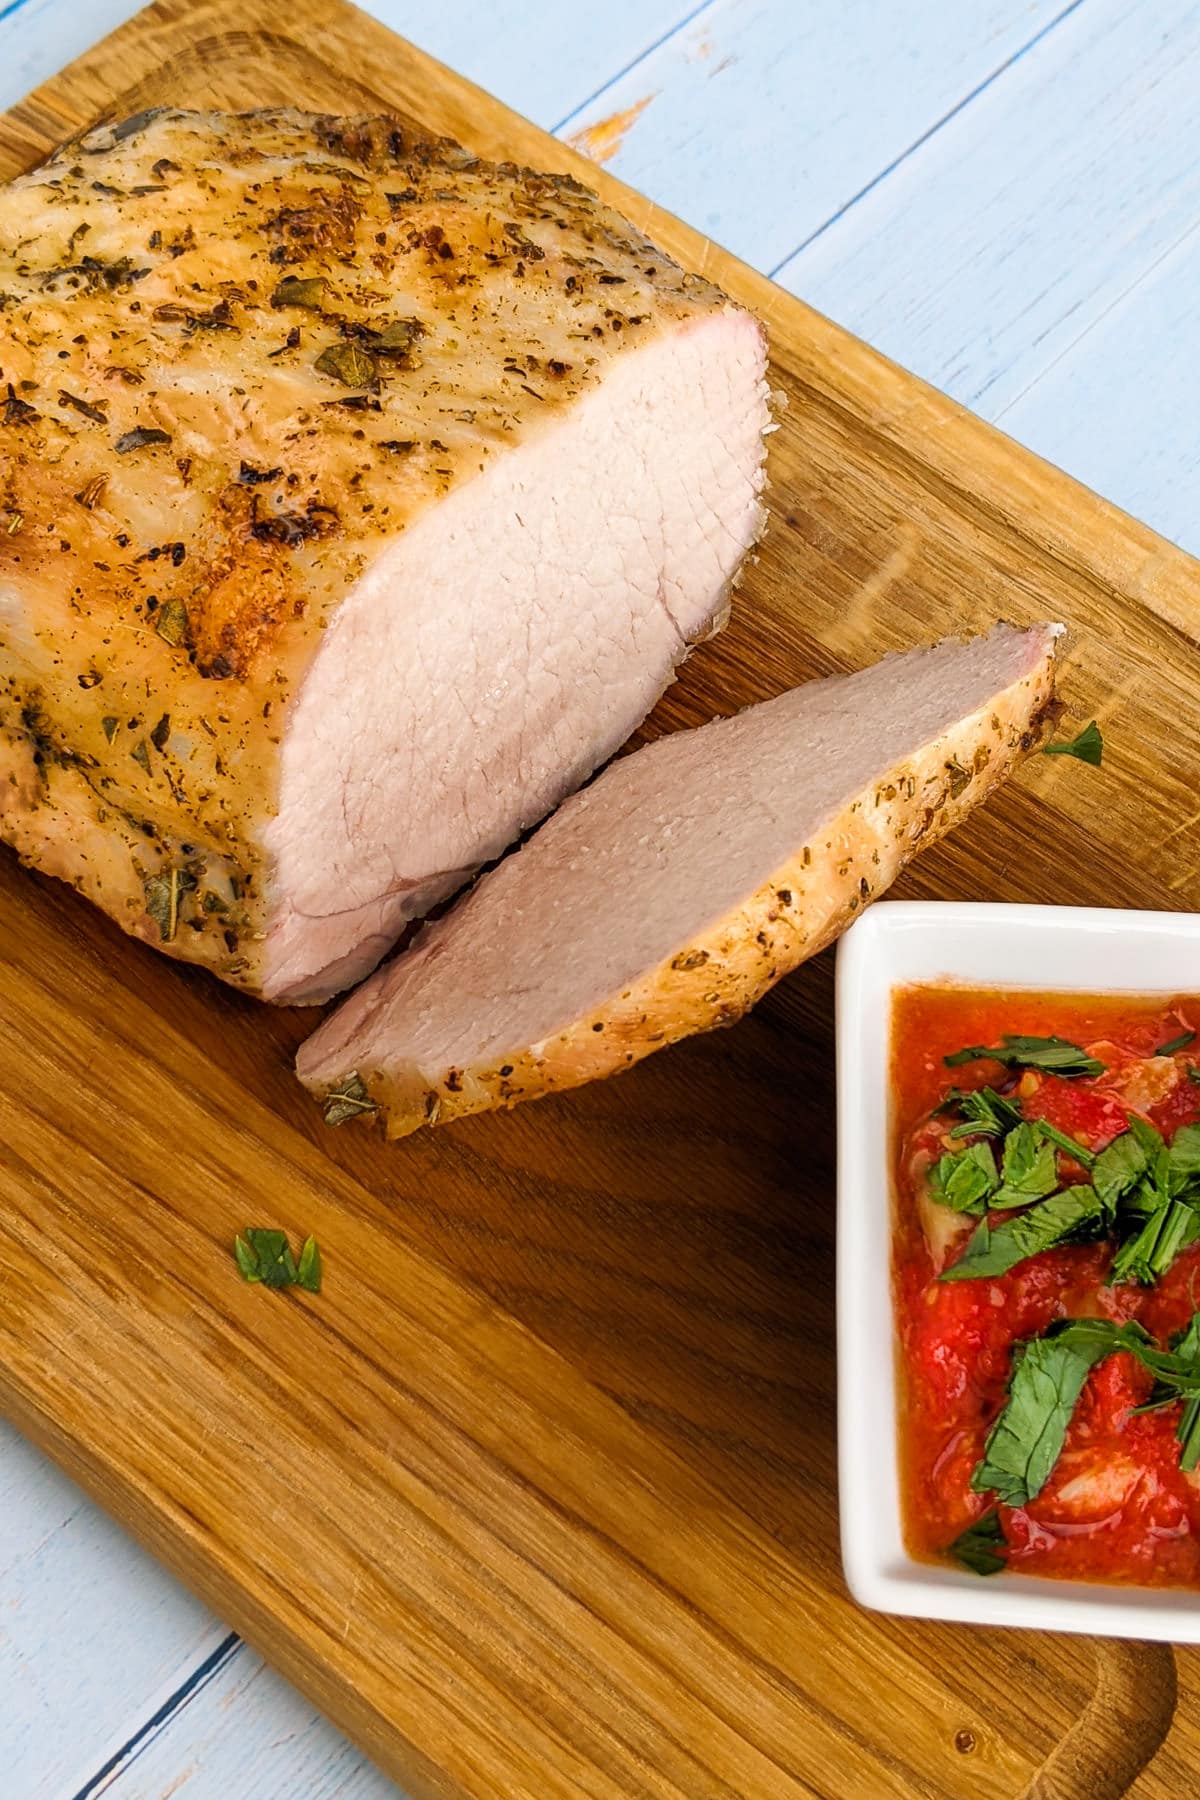 Slices of pork loin with homemade tomato sauce.